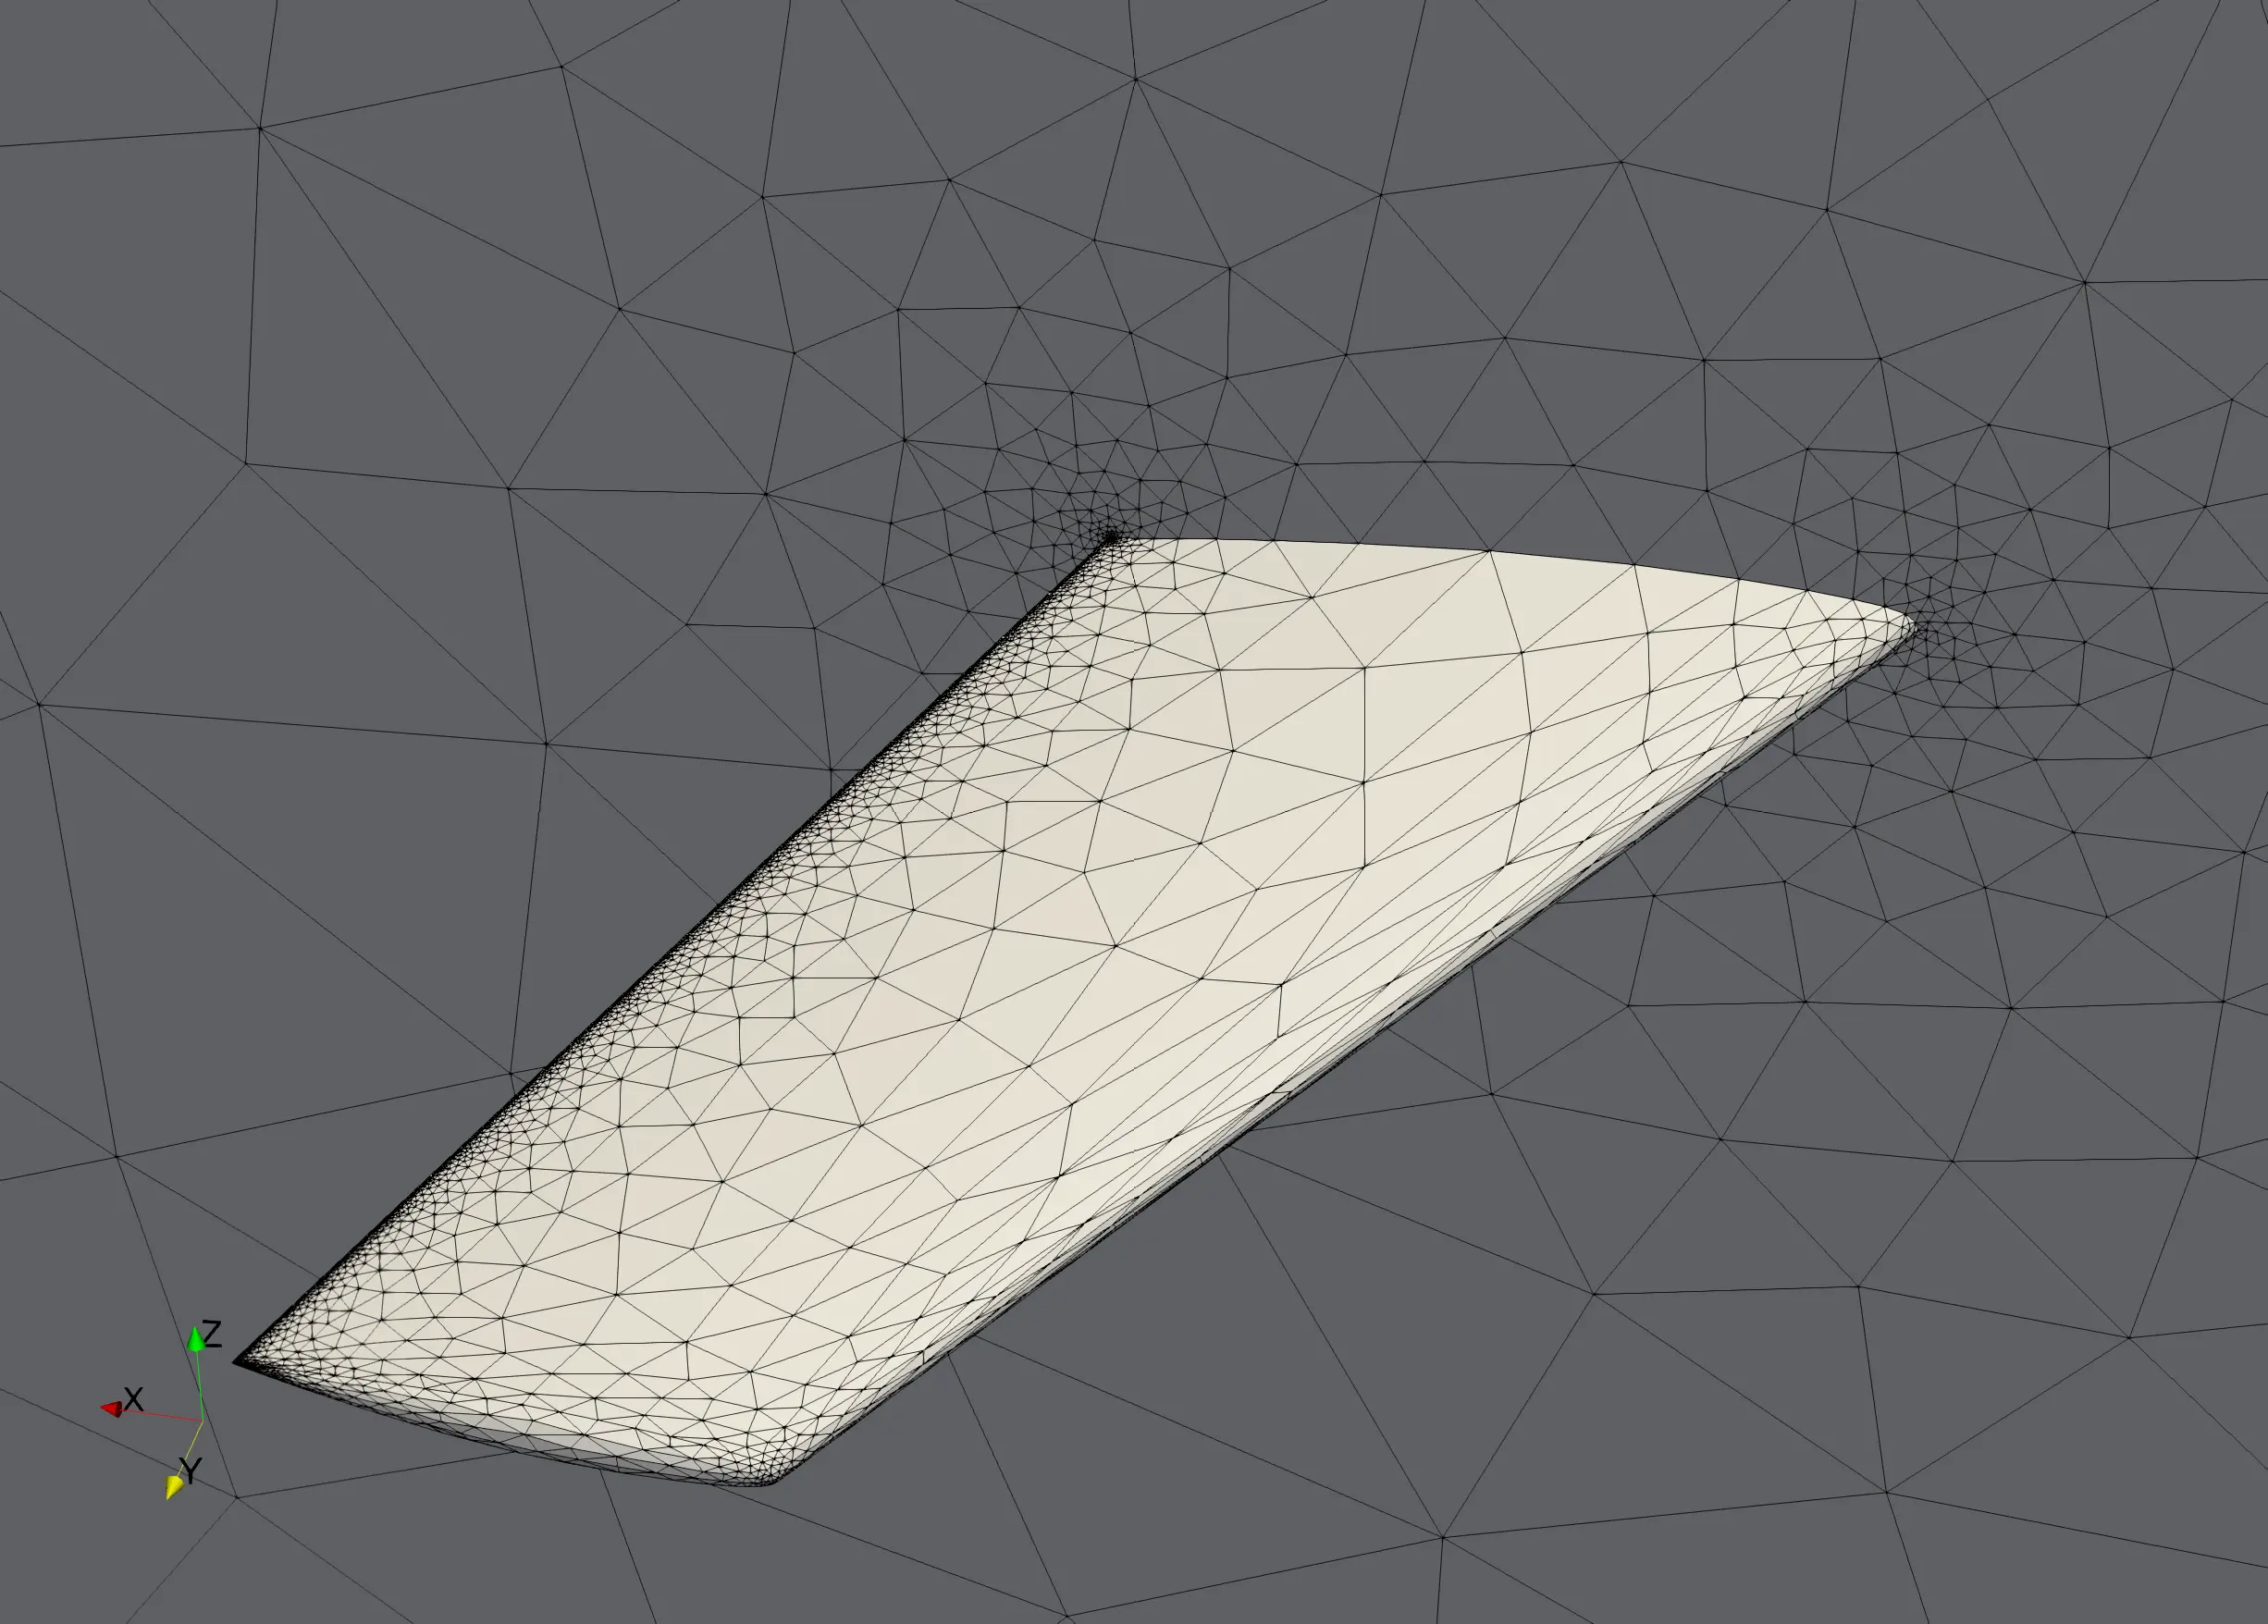 Onera M6 wing. Initial mesh adapted on the geometric features of the wing. (8k vertices)